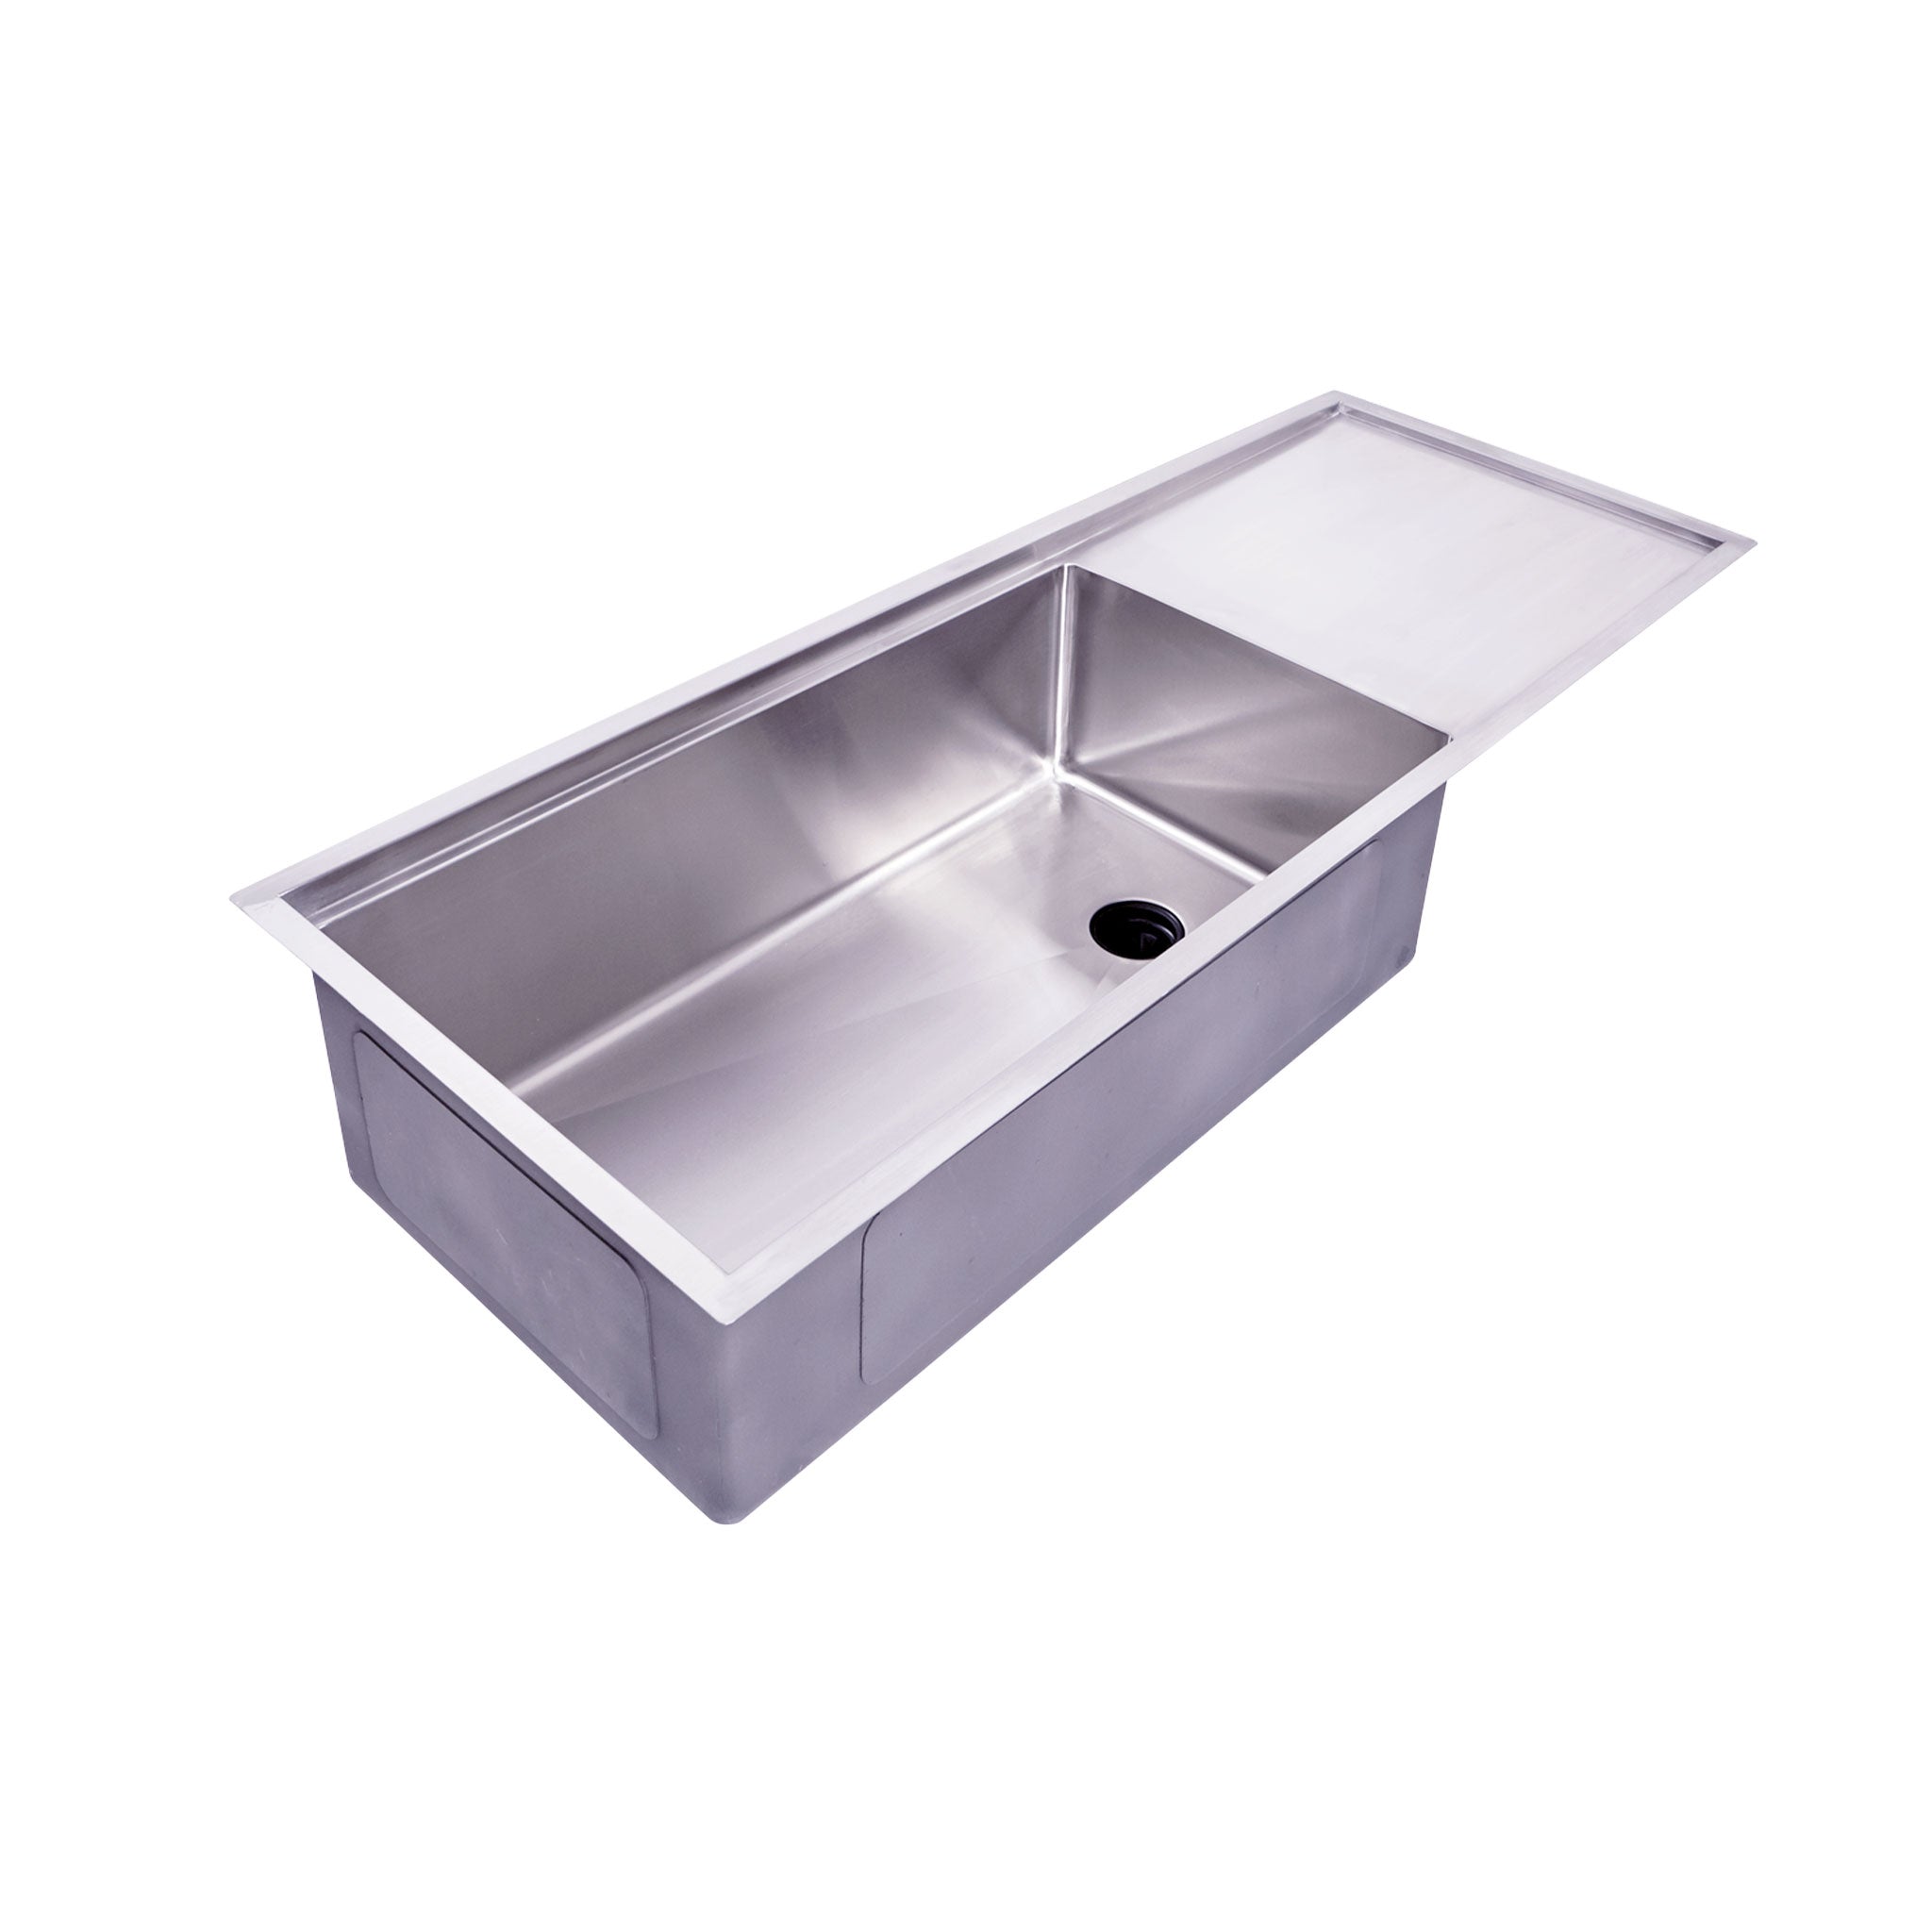 Drainboard workstation sink with reversible seamless drain